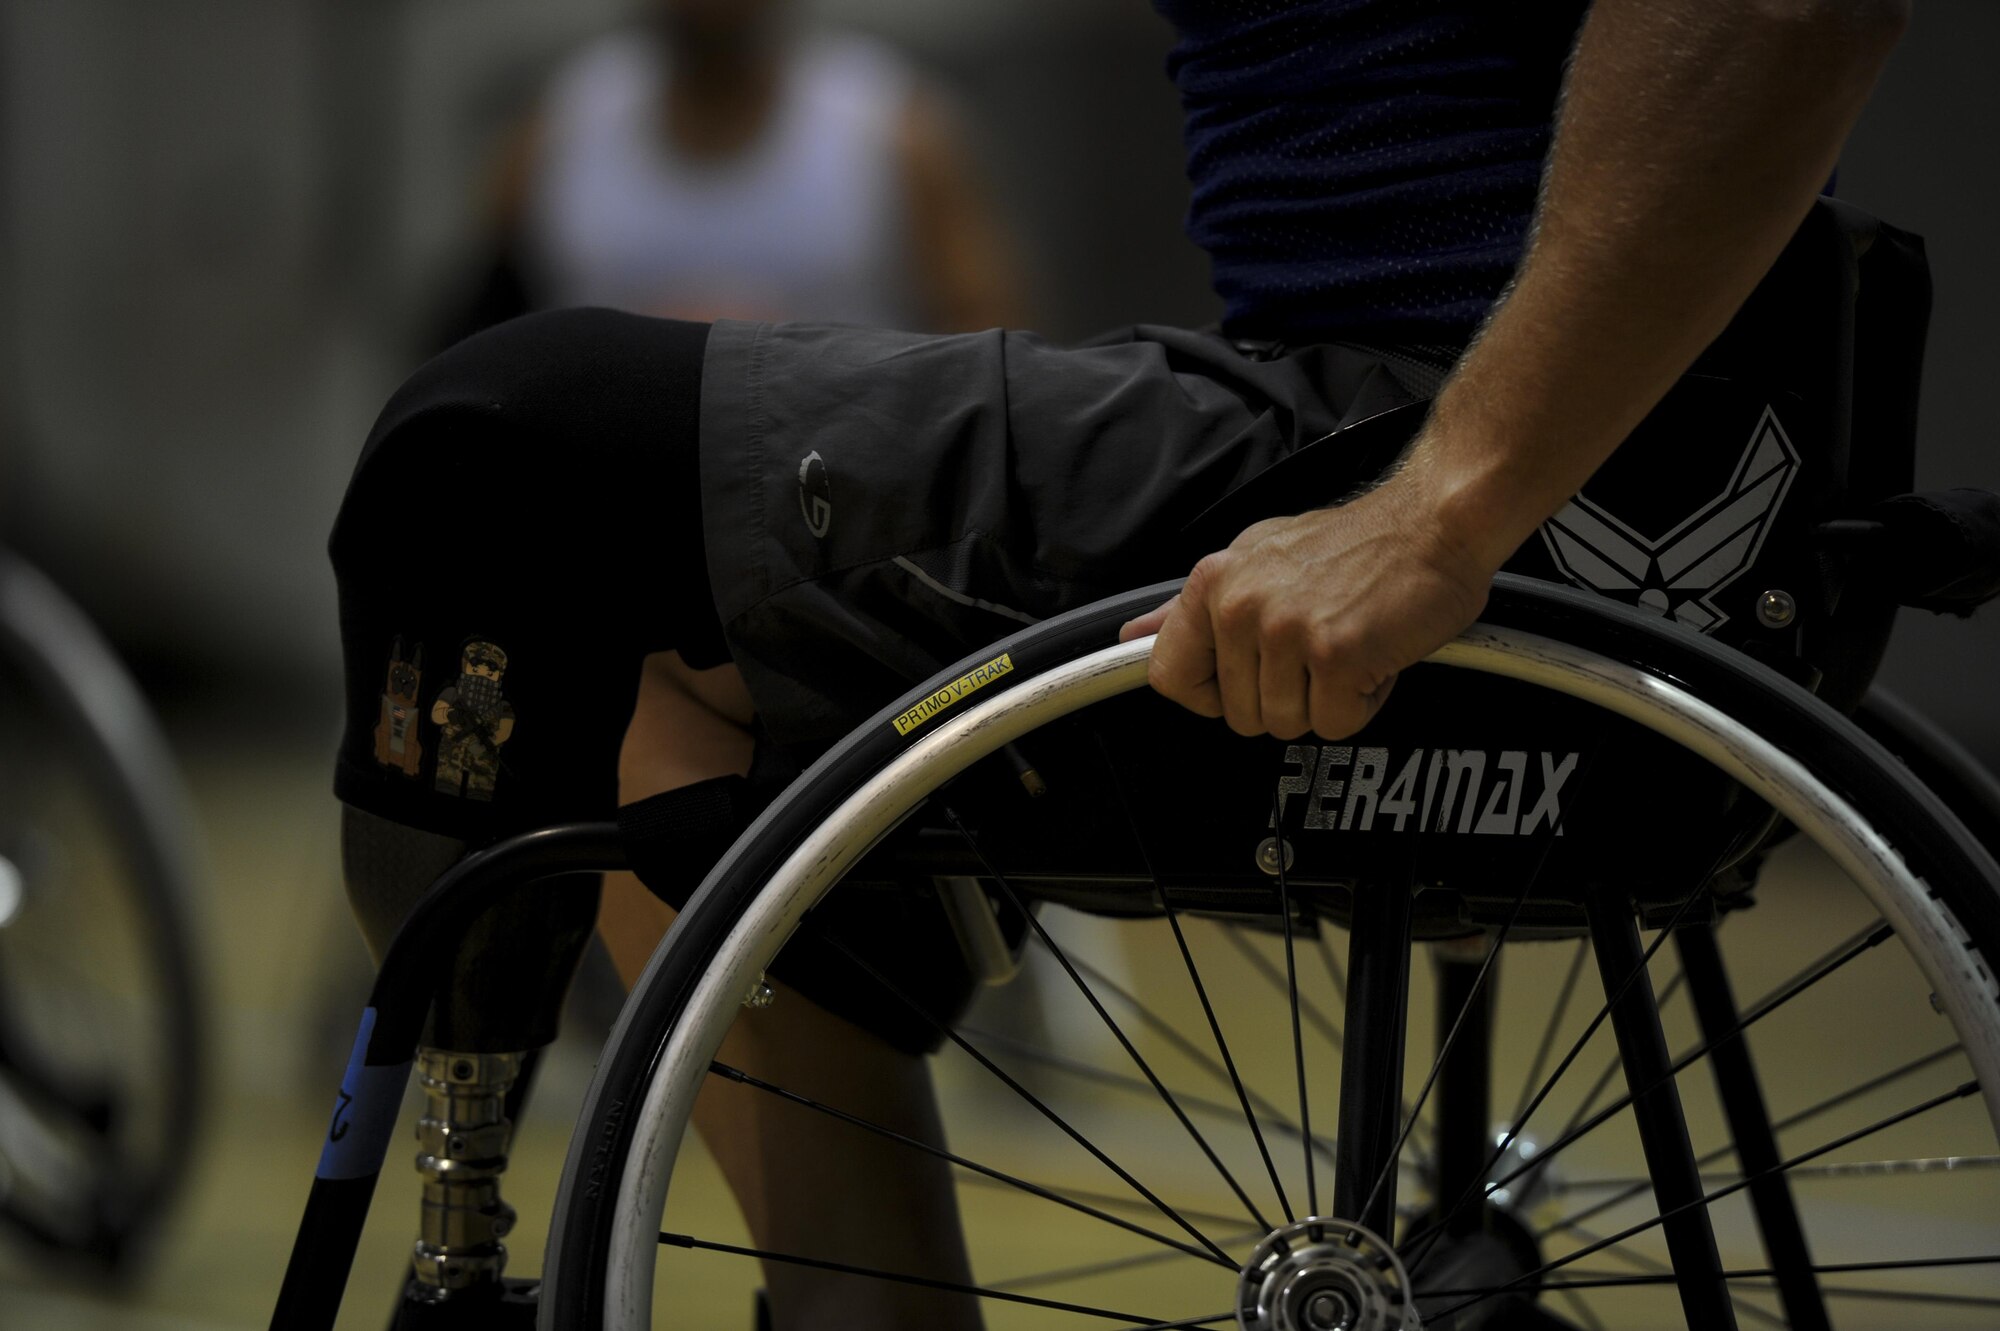 Ben Seekell, a point guard on the Air Force wheelchair basketball team, participates during practice at Hurlburt Field, Fla., April 24, 2017. The AF's team is set to compete with Department of Defense teams in June. (U.S. Air Force photo by Airman 1st Class Dennis Spain)